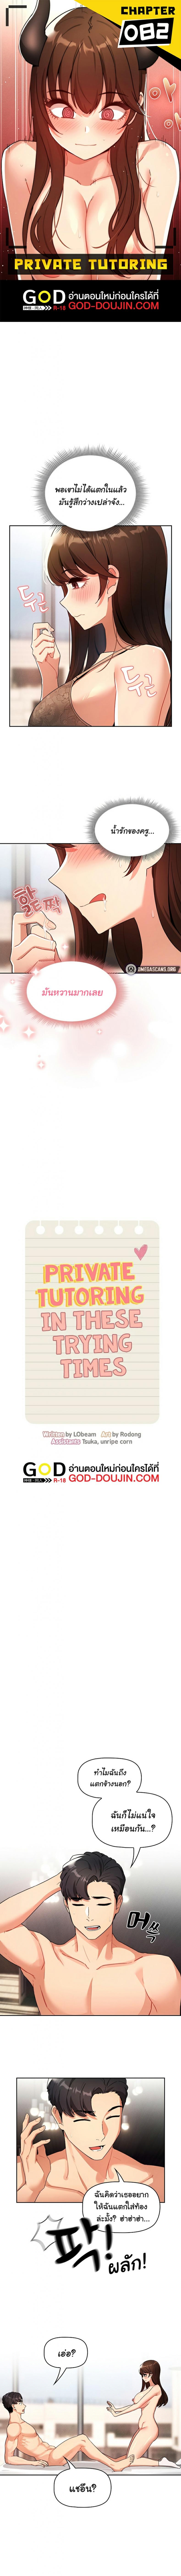 Private Tutoring in These Trying Times 82 ภาพที่ 1